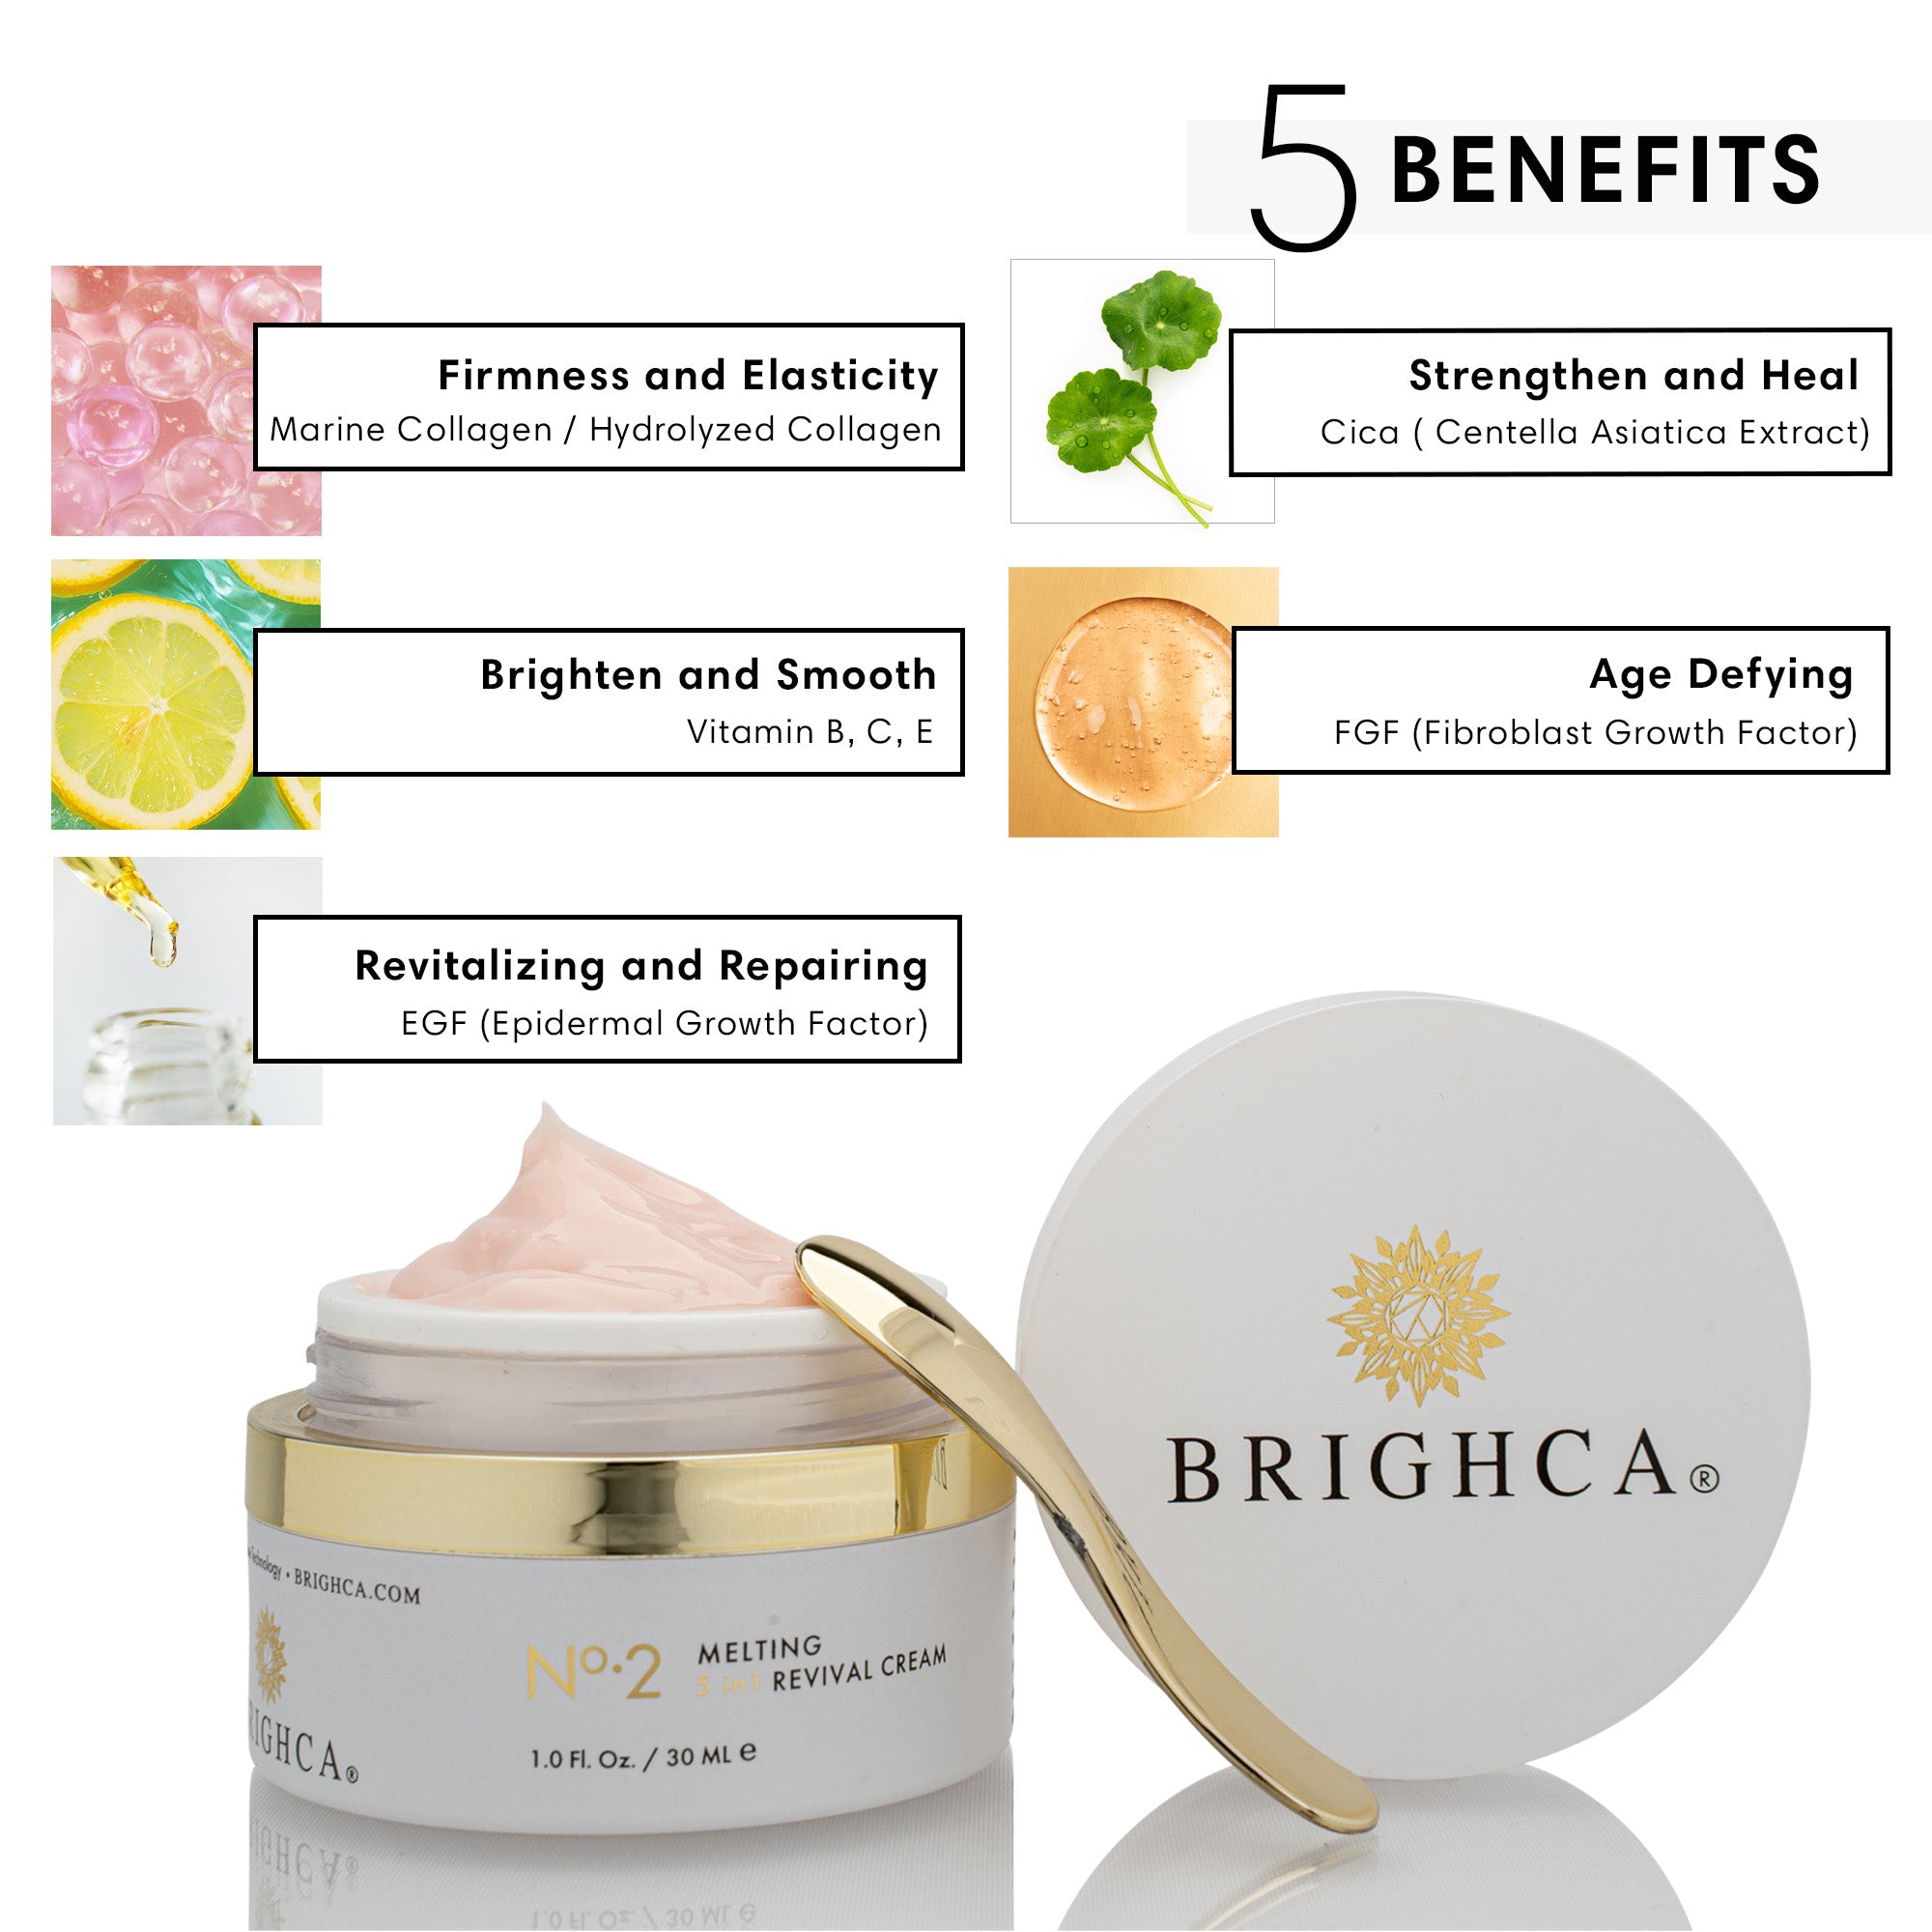 marine collagen cream to enhance firmness and elasticity, strengthen, heal, brighten, smooth, repair and revitalize cells 